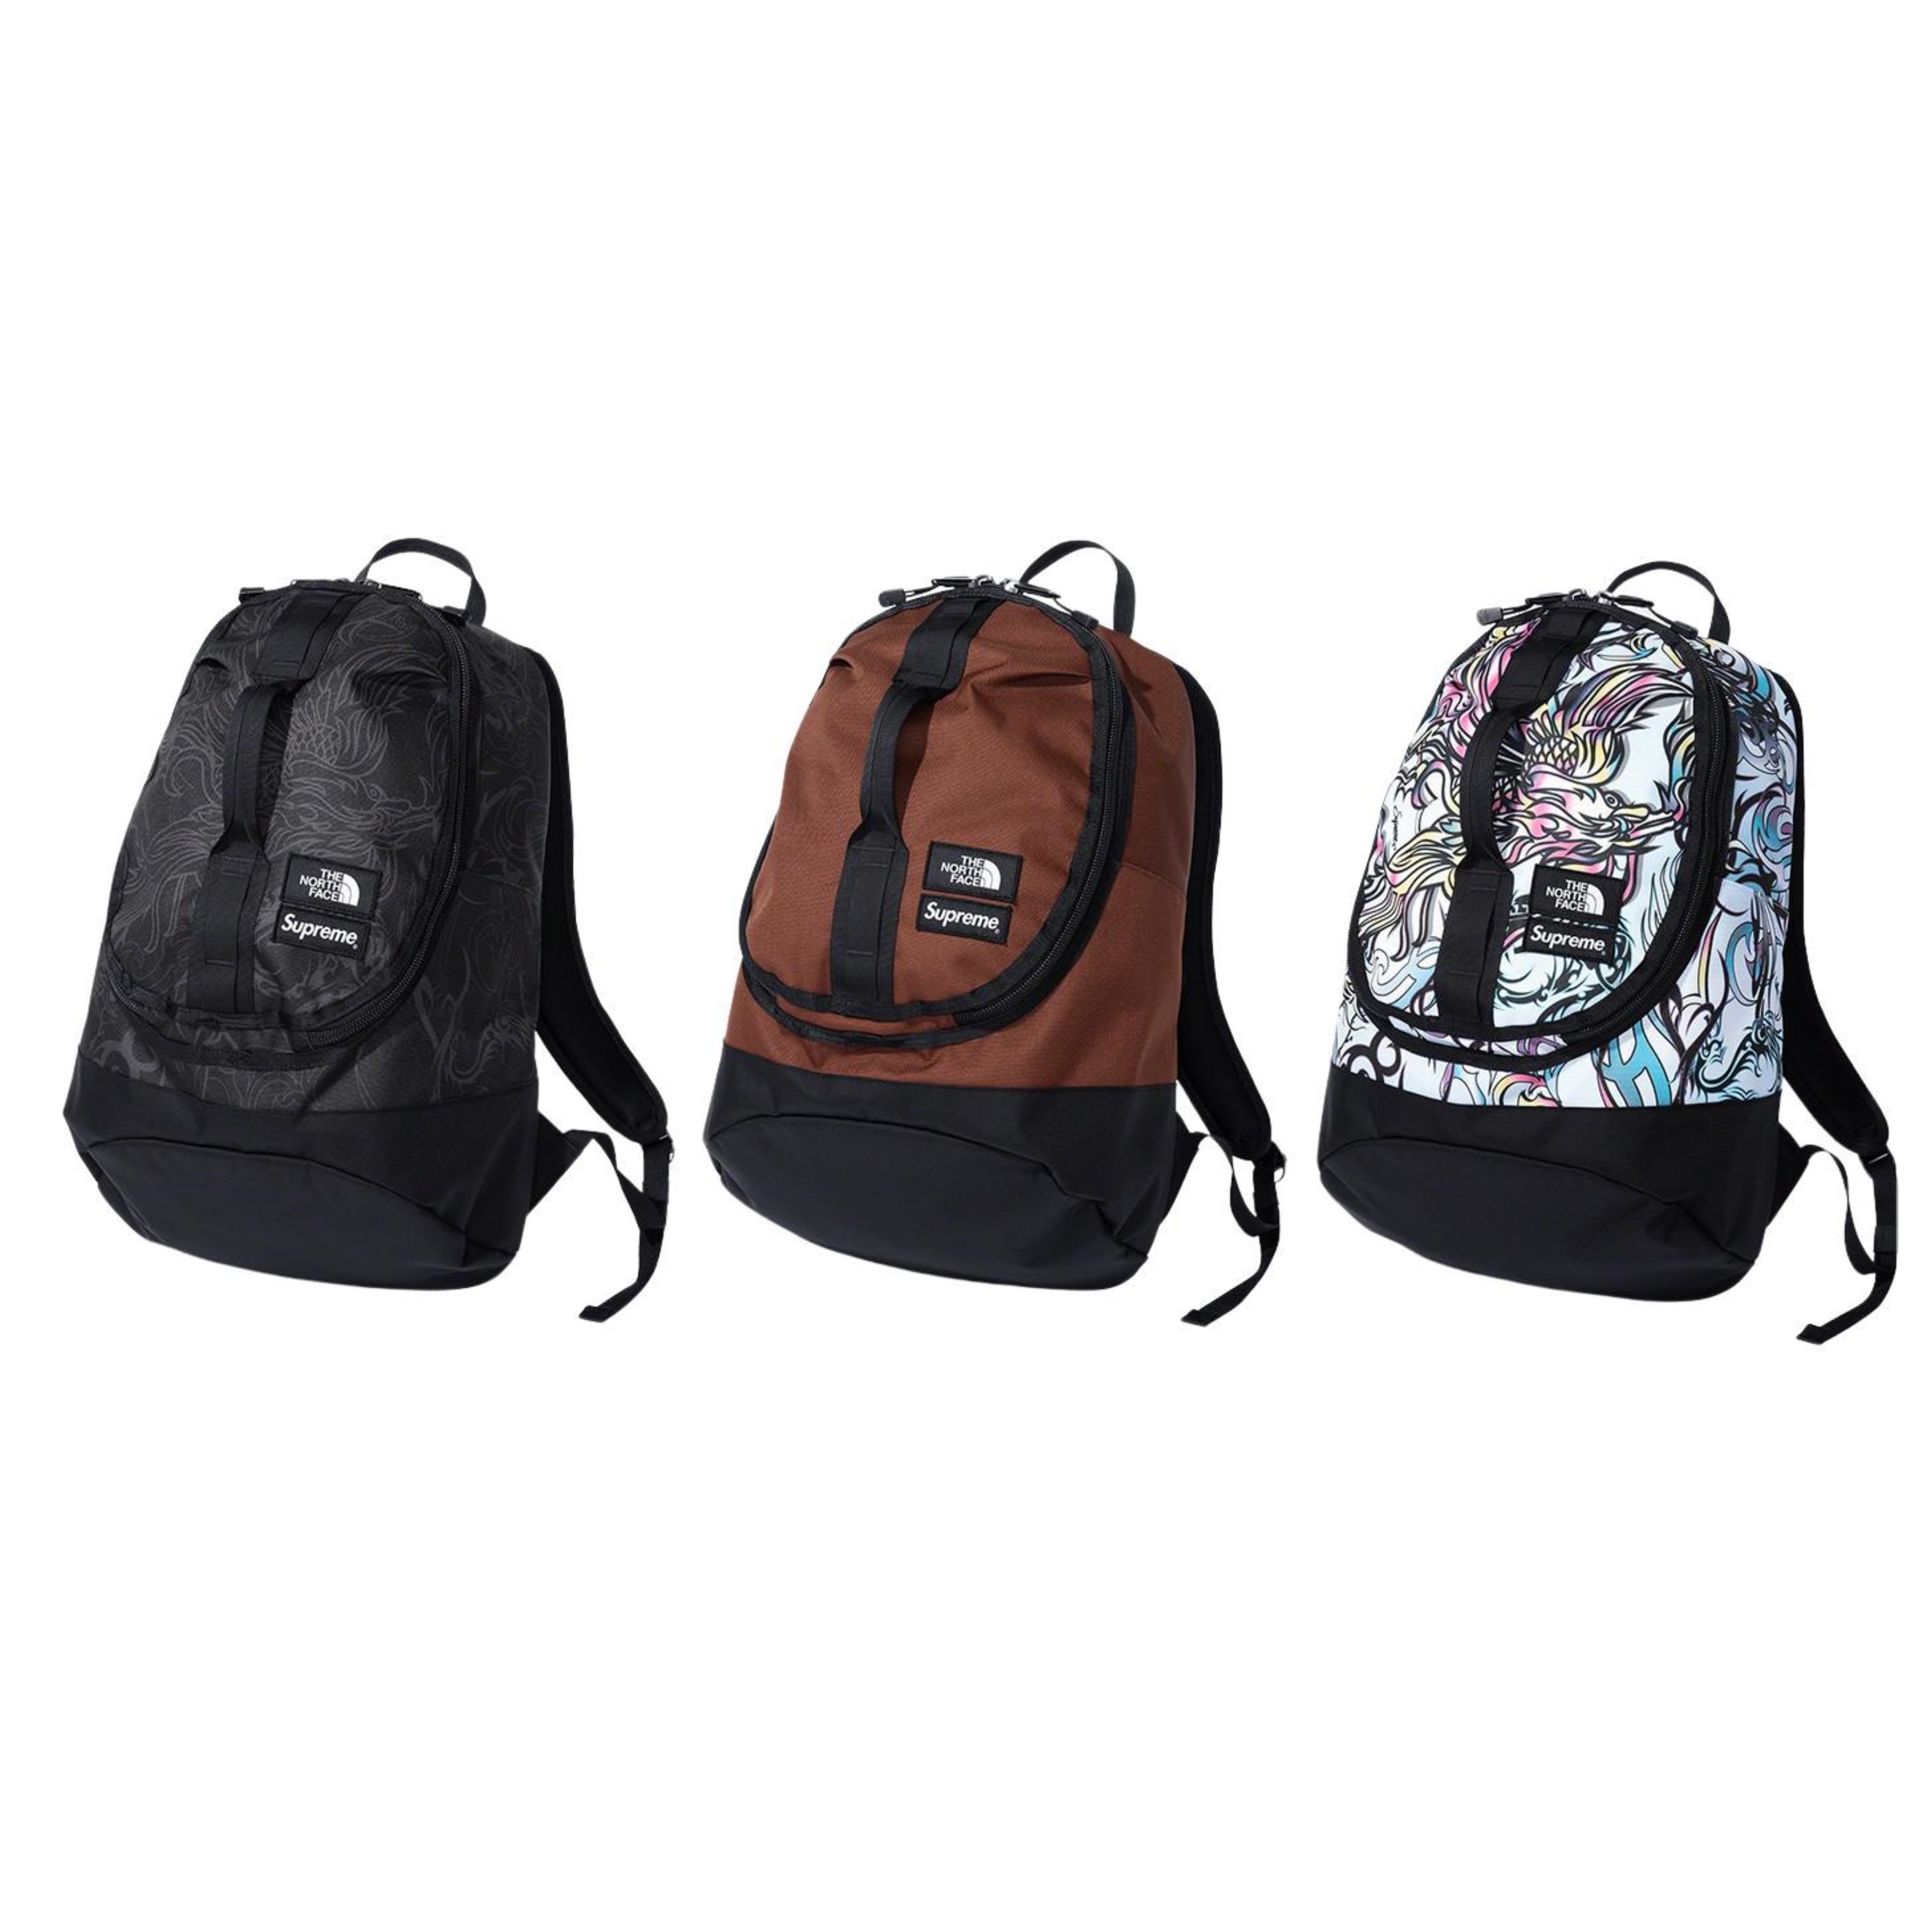 2022AW SUPREME THE NORTH FACE STEEP TECH BACKPACK 聯名後背